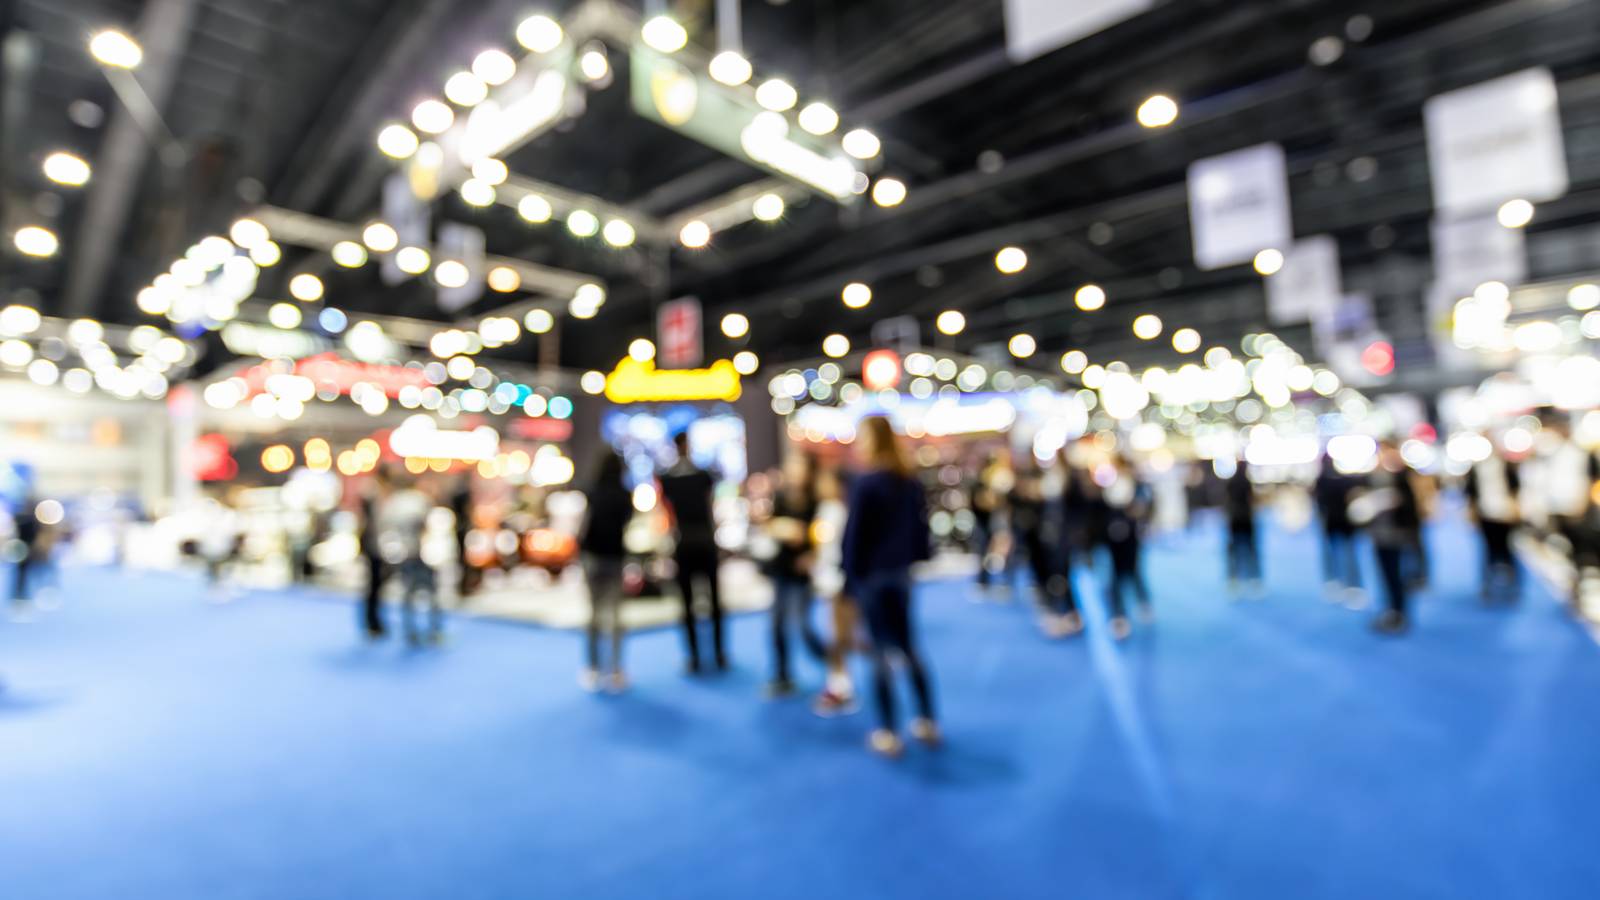 A blurred image of a convention.